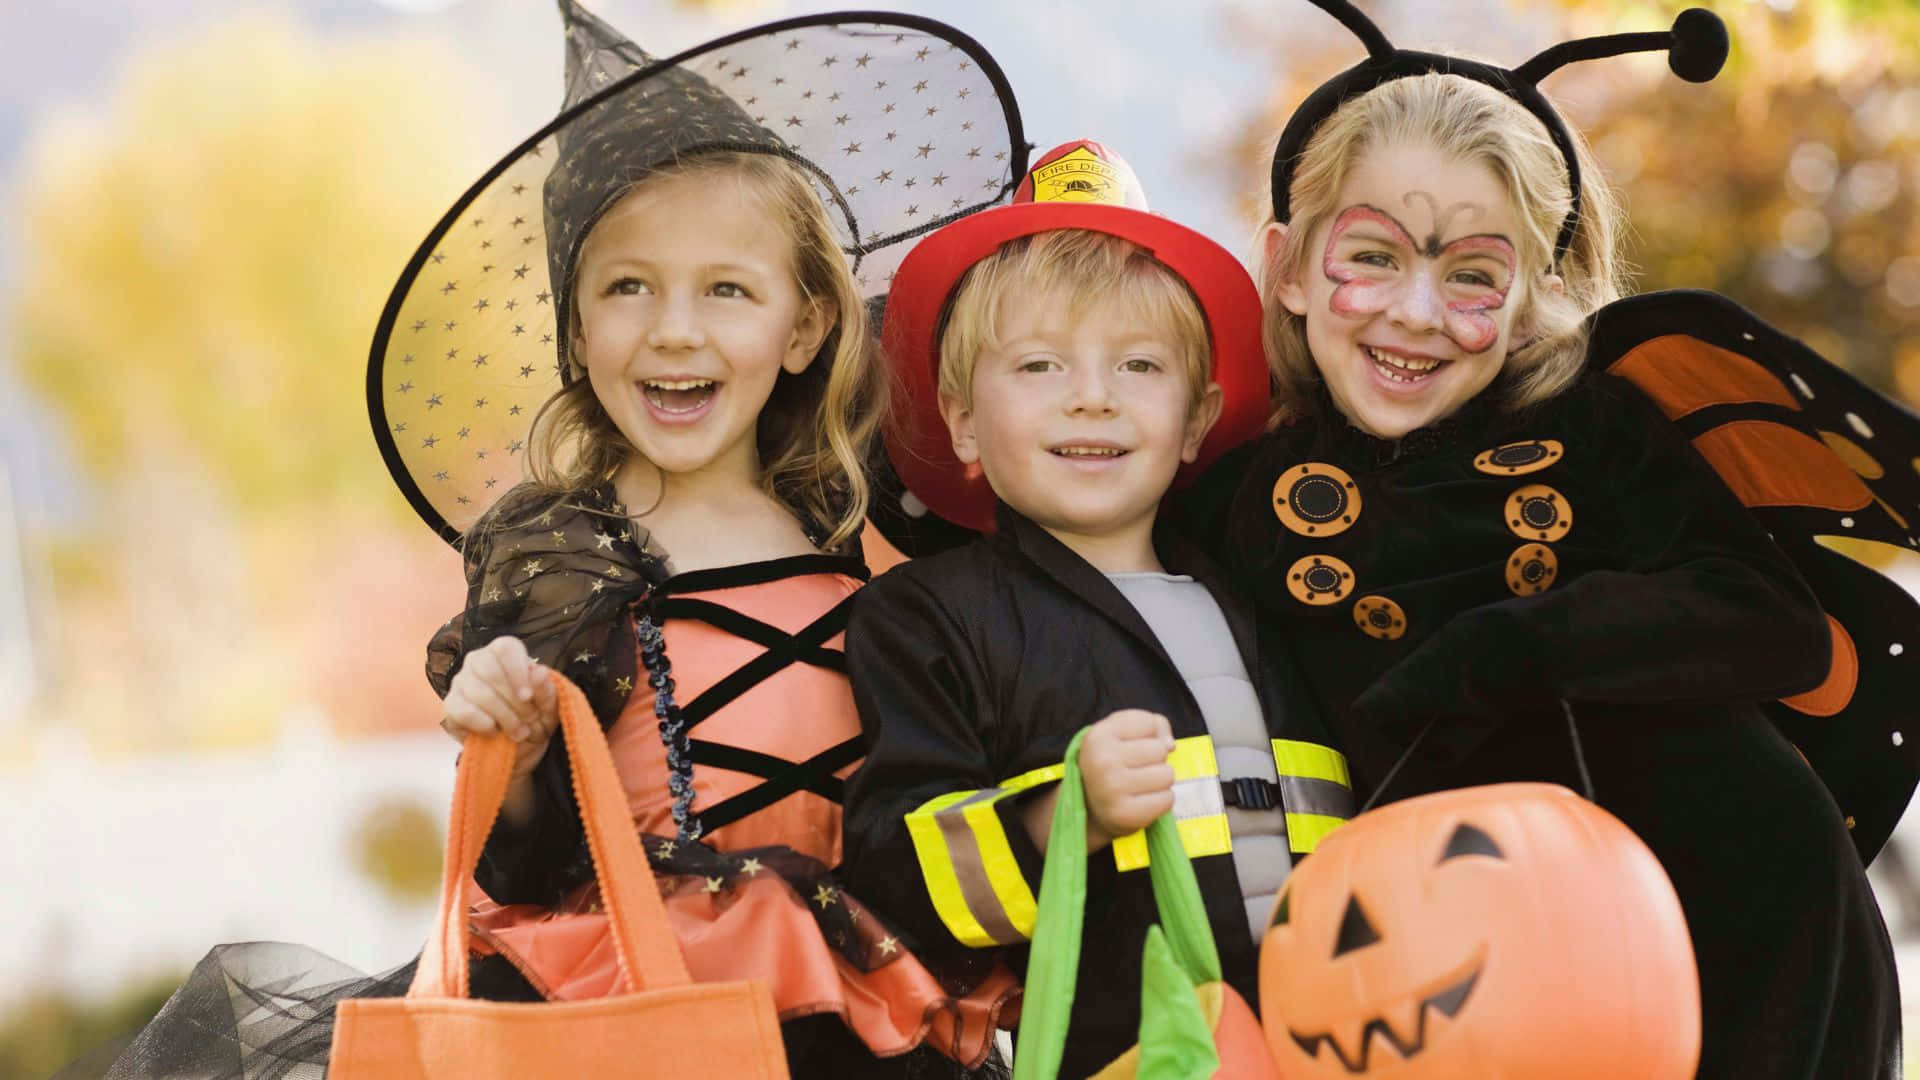 Find the perfect costume this Halloween Wallpaper